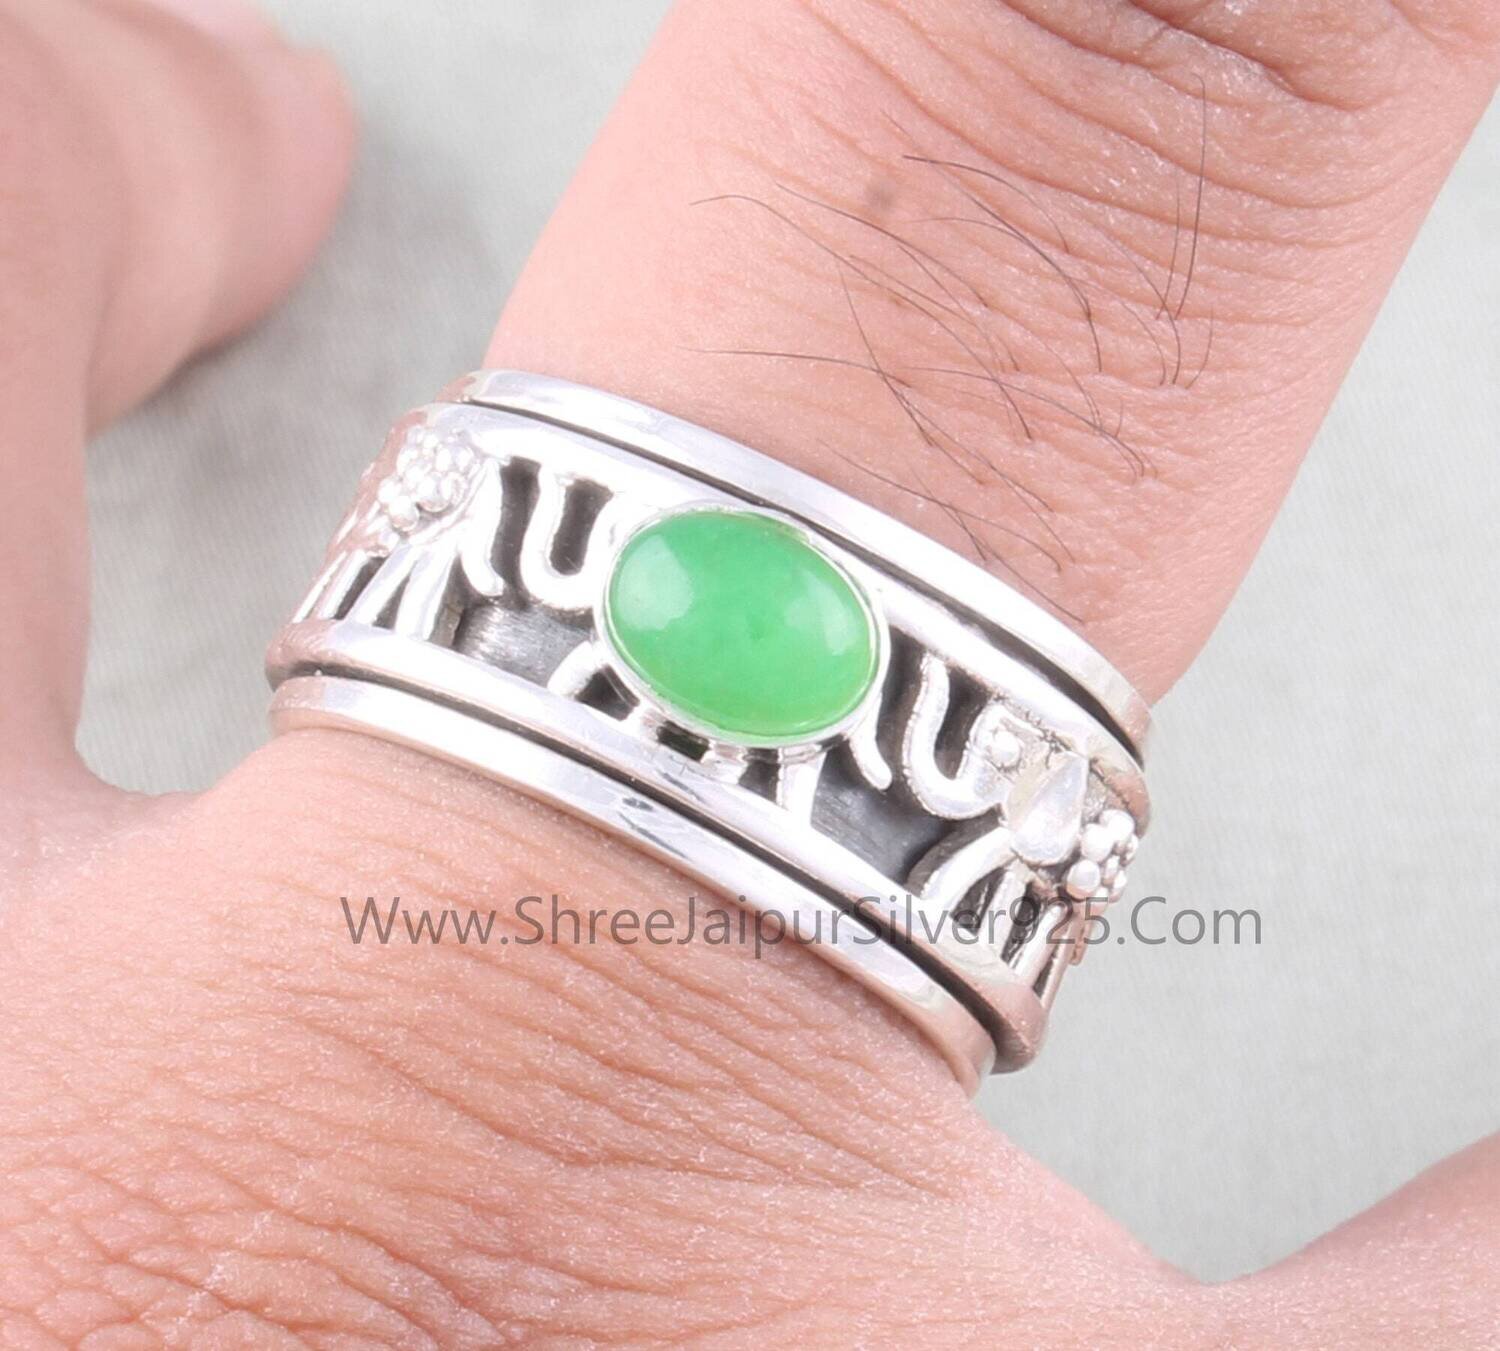 Green Jade Oval Solid 925 Sterling Silver Elephant Spinner Ring For Women, Handmade Band Anxiety Fidget Ring For Wedding Anniversary Gifts